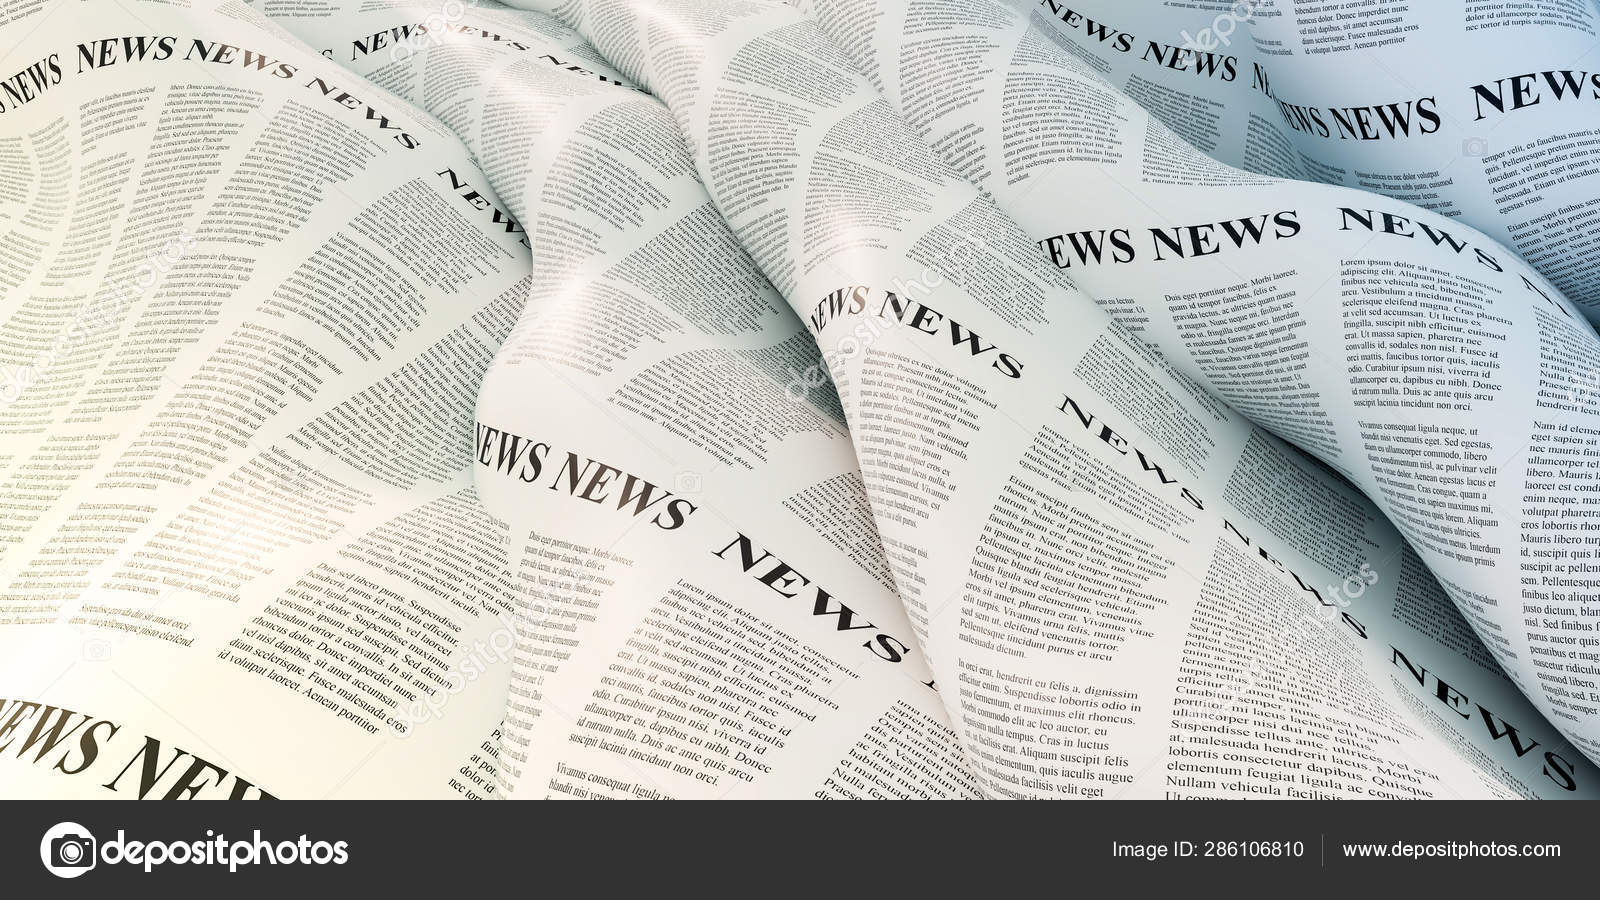 Abstract newspaper background, original 3d rendering Stock Photo by  ©tostphoto 286106810